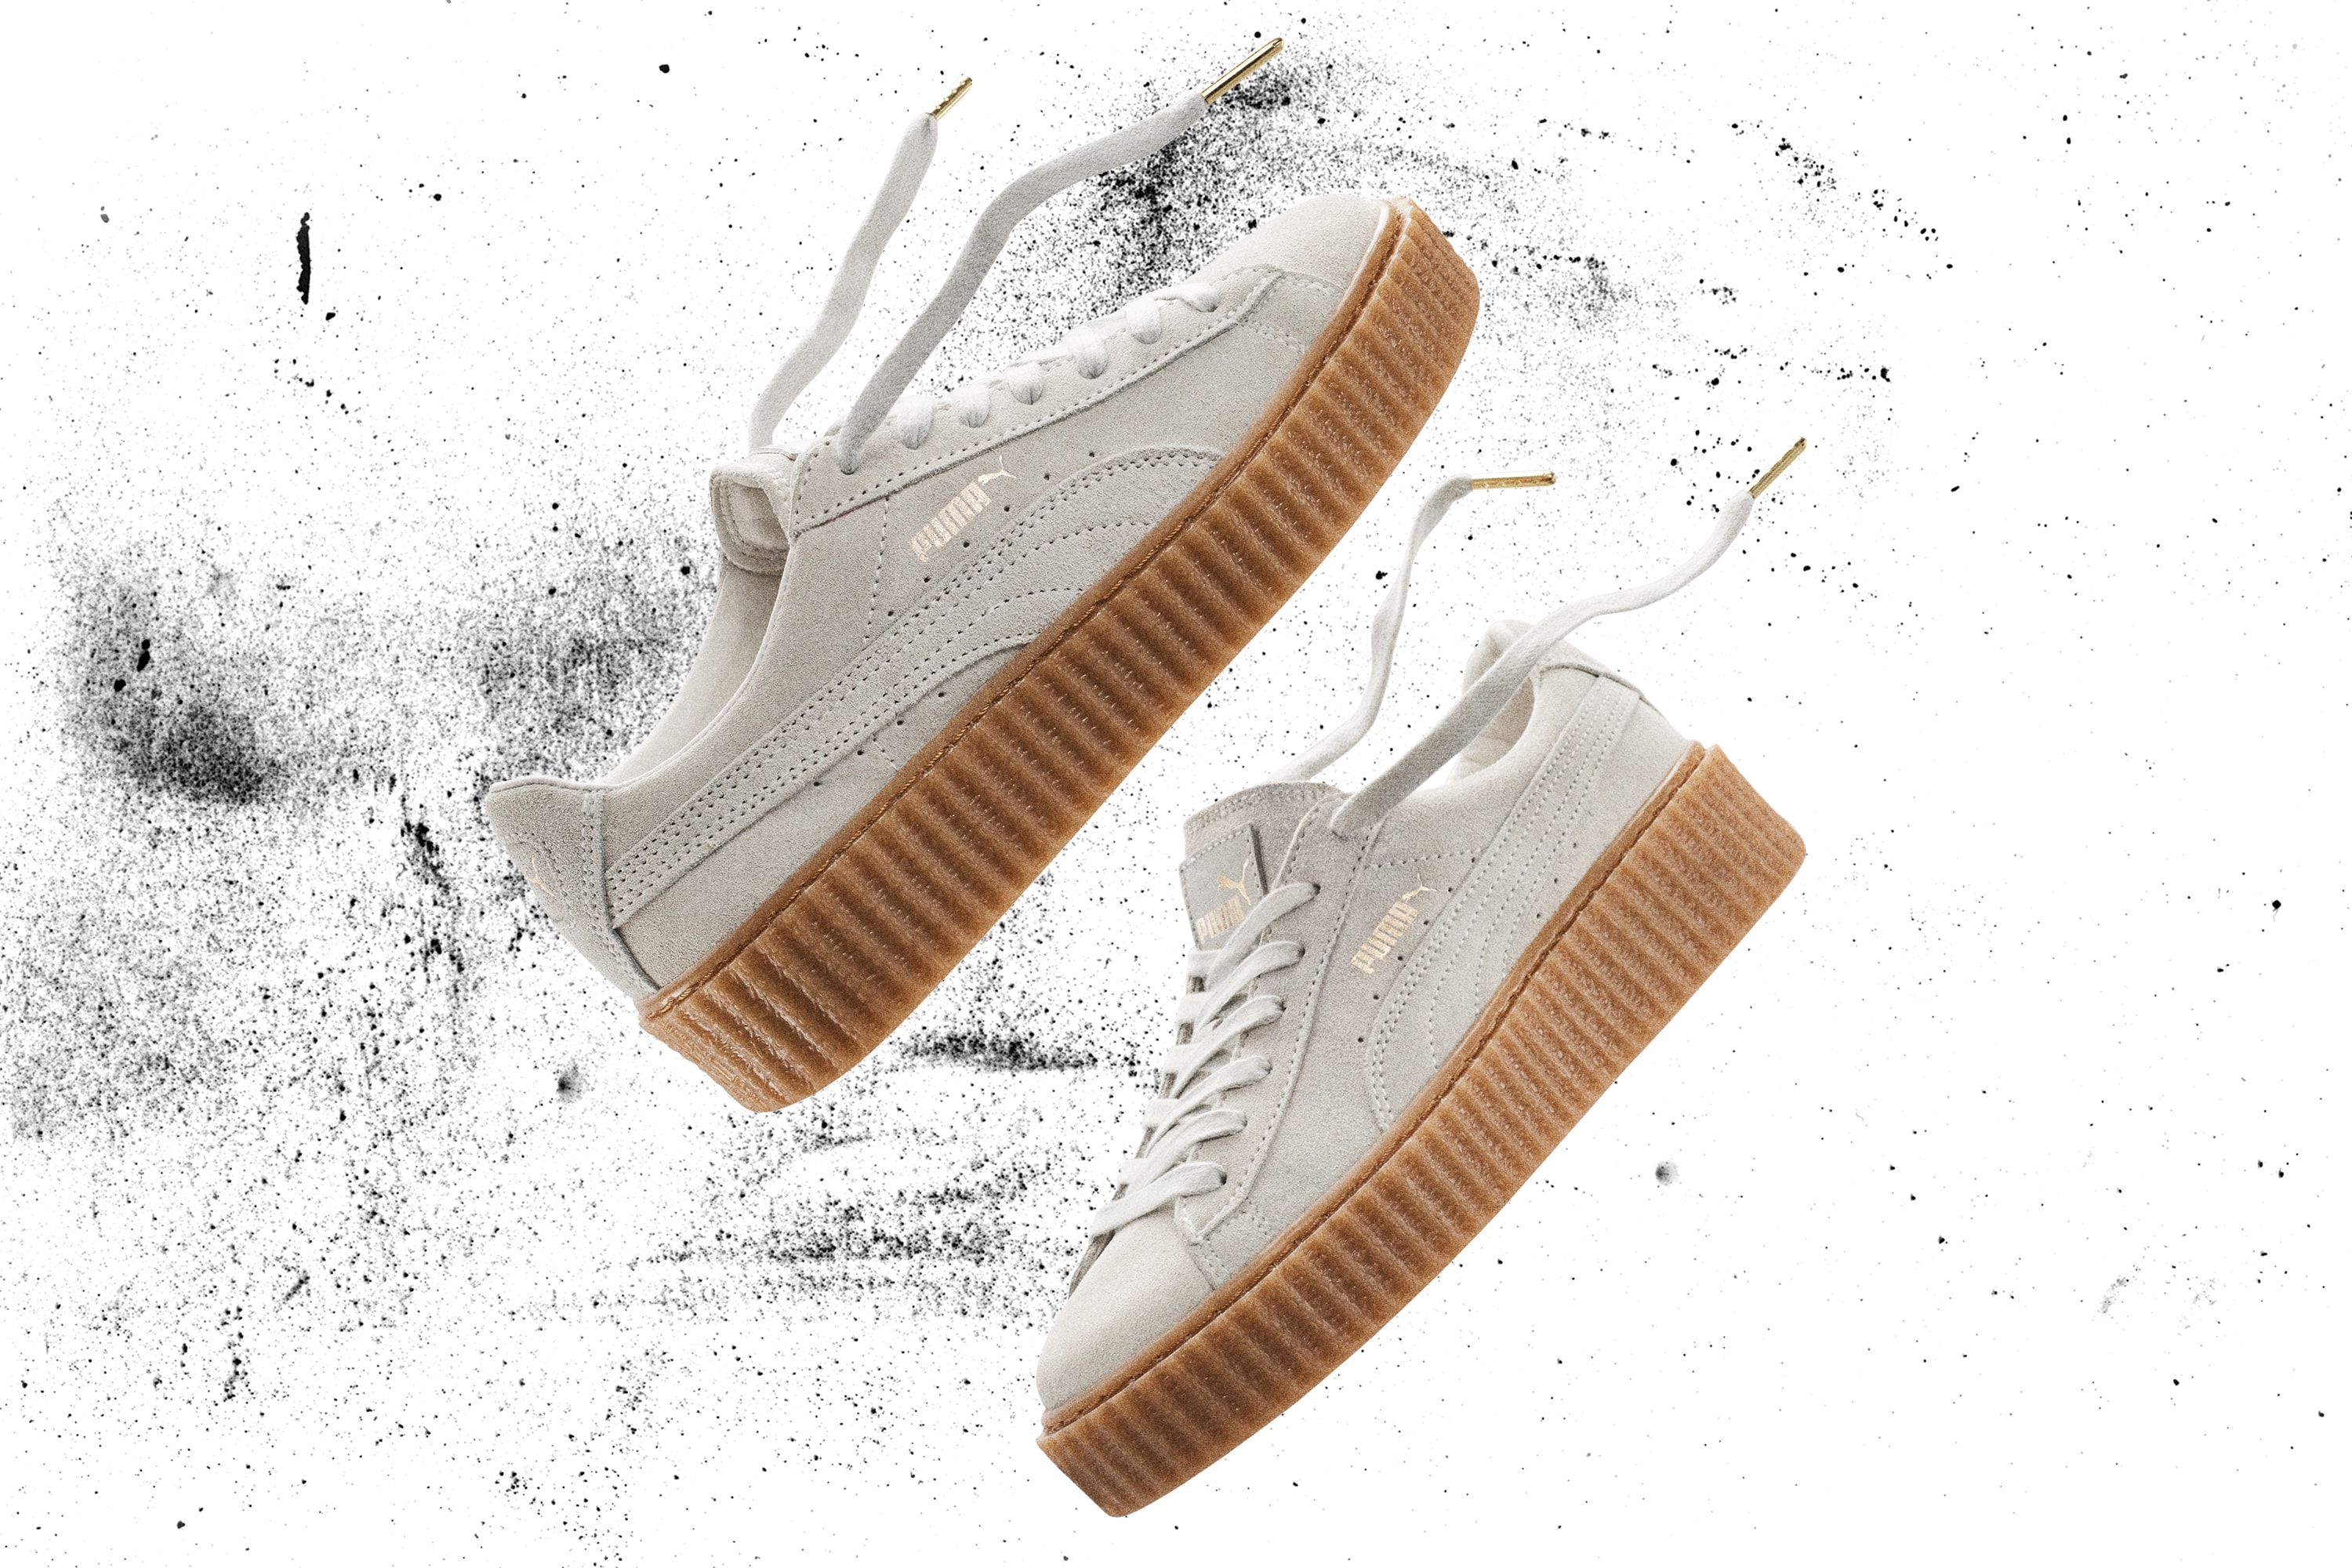 The FENTY BY RIHANNA x PUMA SUEDE CREEPER will release in Taiwan on September 29